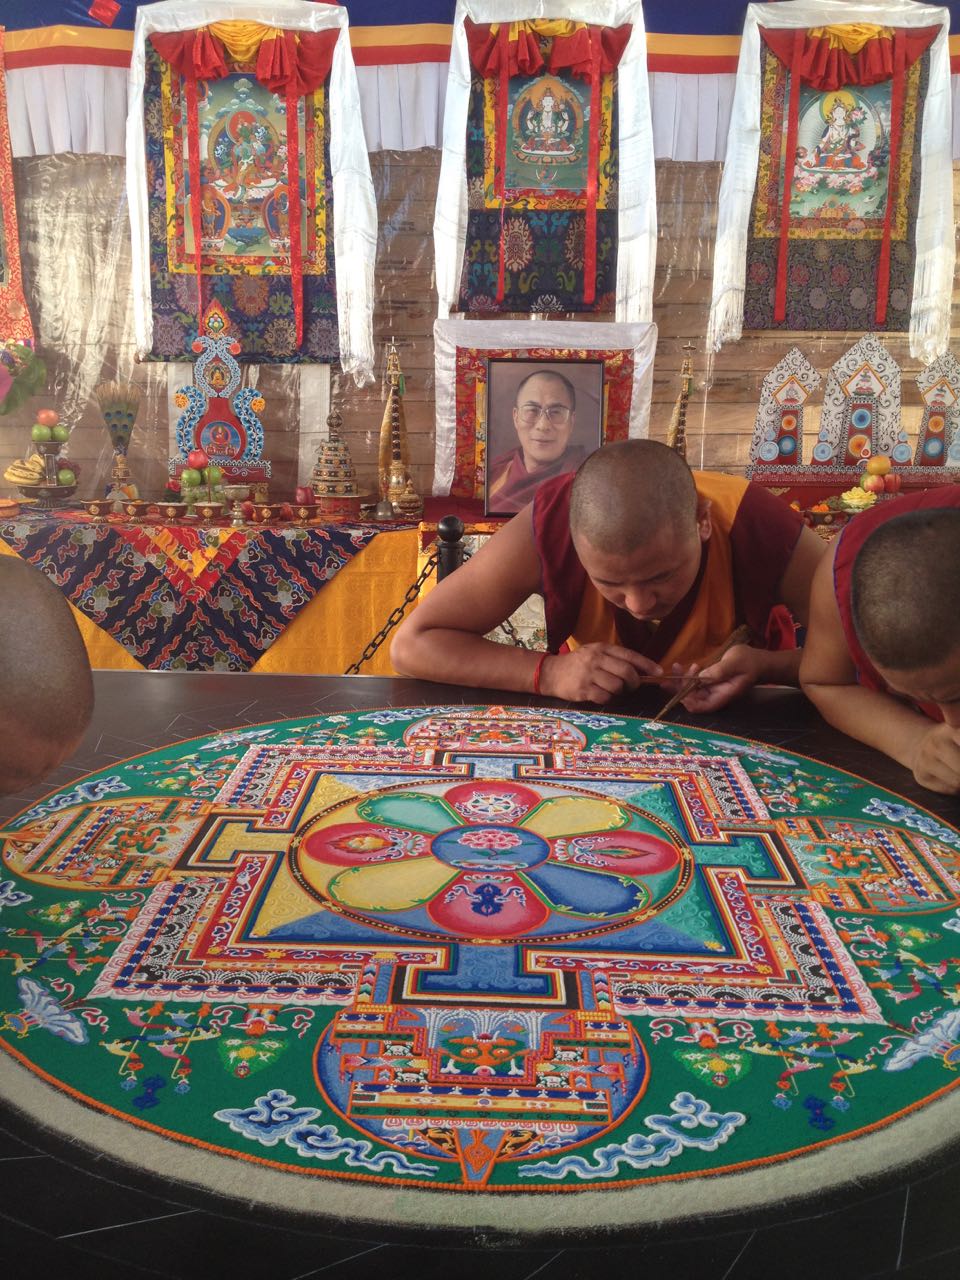 The lessons of prayer flags for the Dalai Lama in Alabama